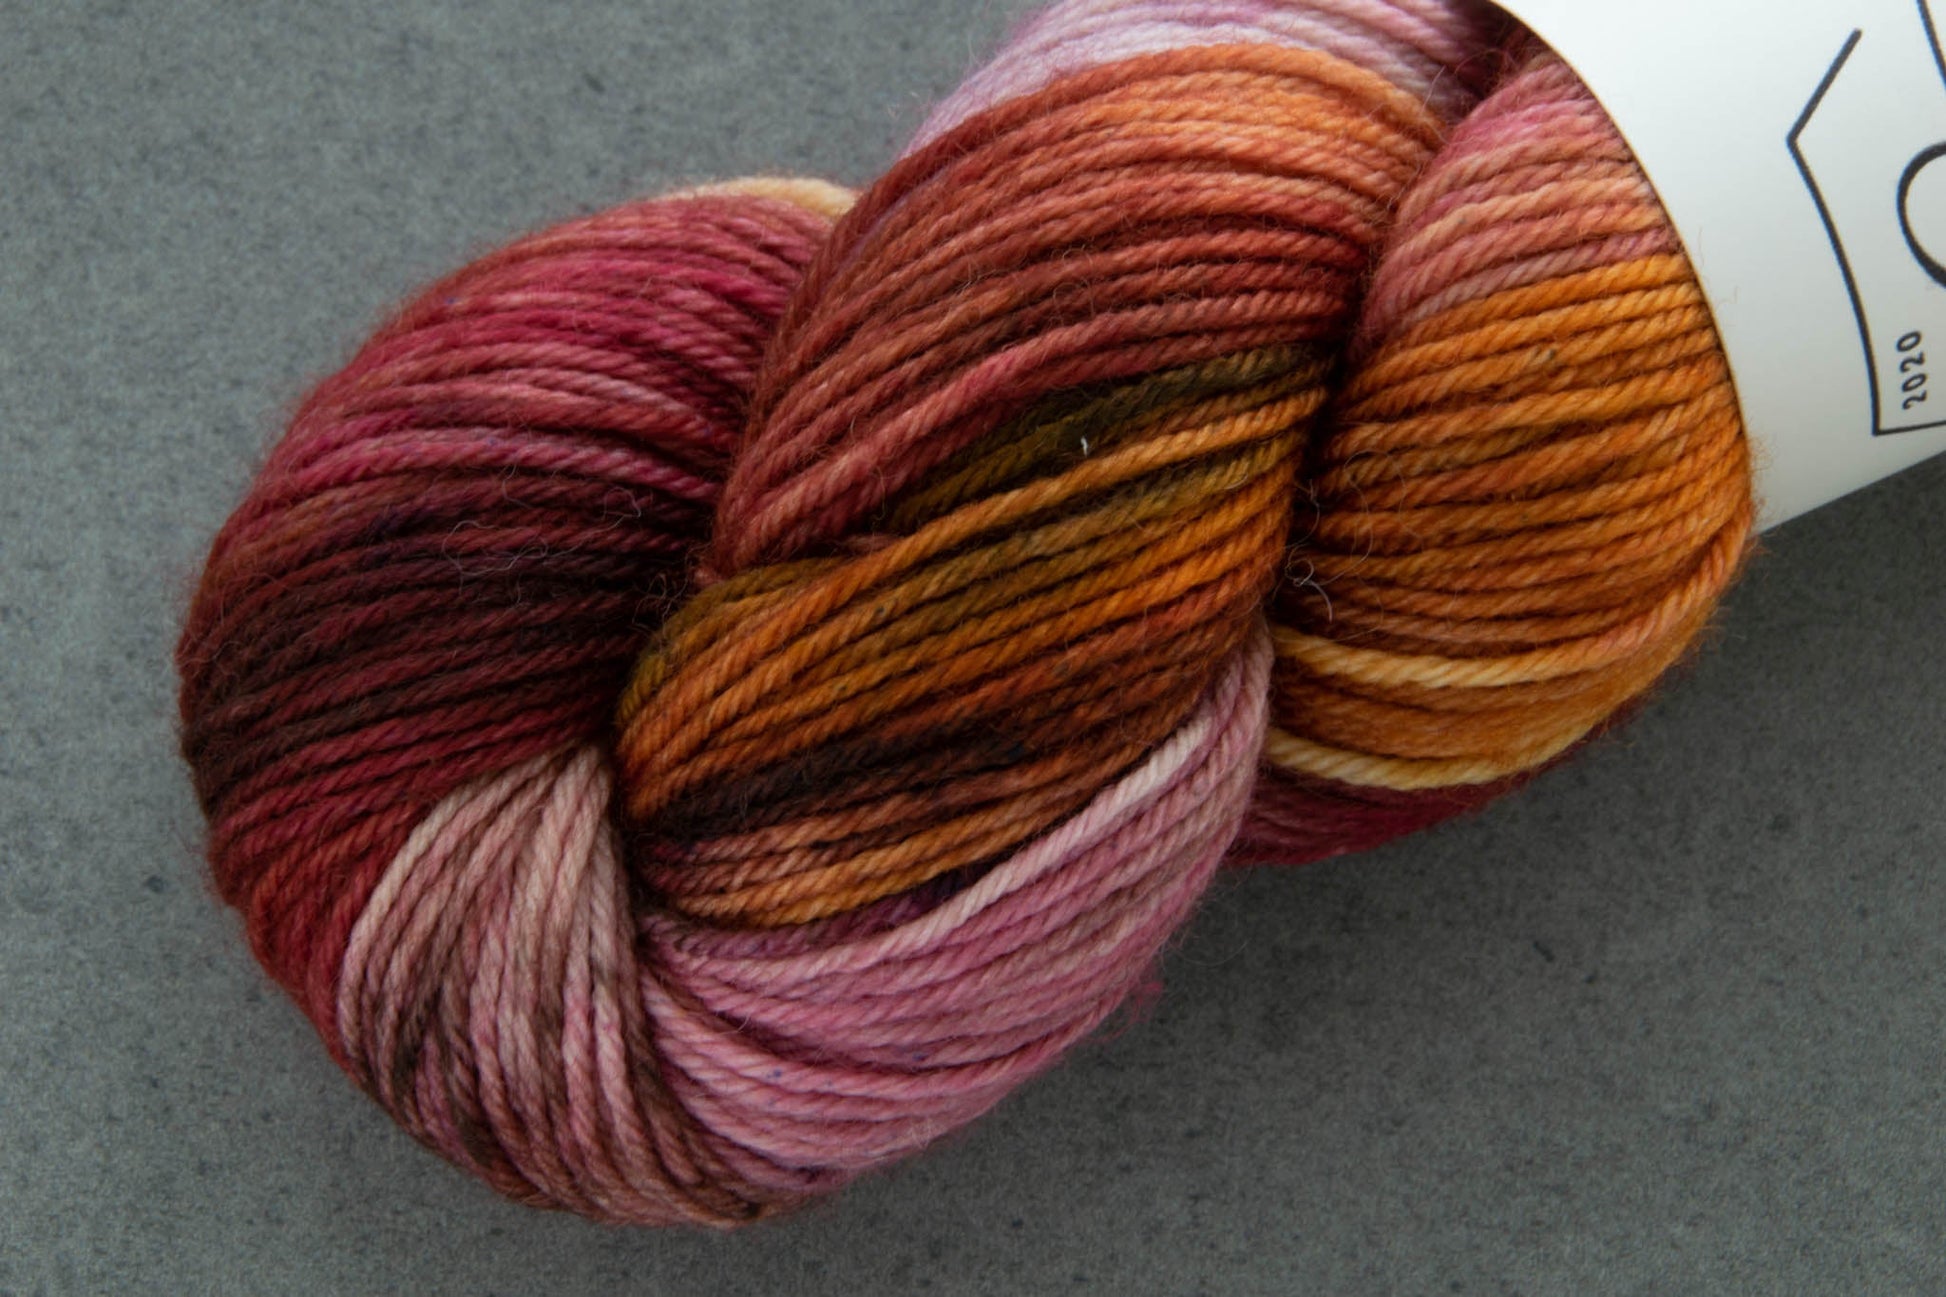 Closeup of one side of the skein with dark maroon, light pink, orange, and coppery brown sections.